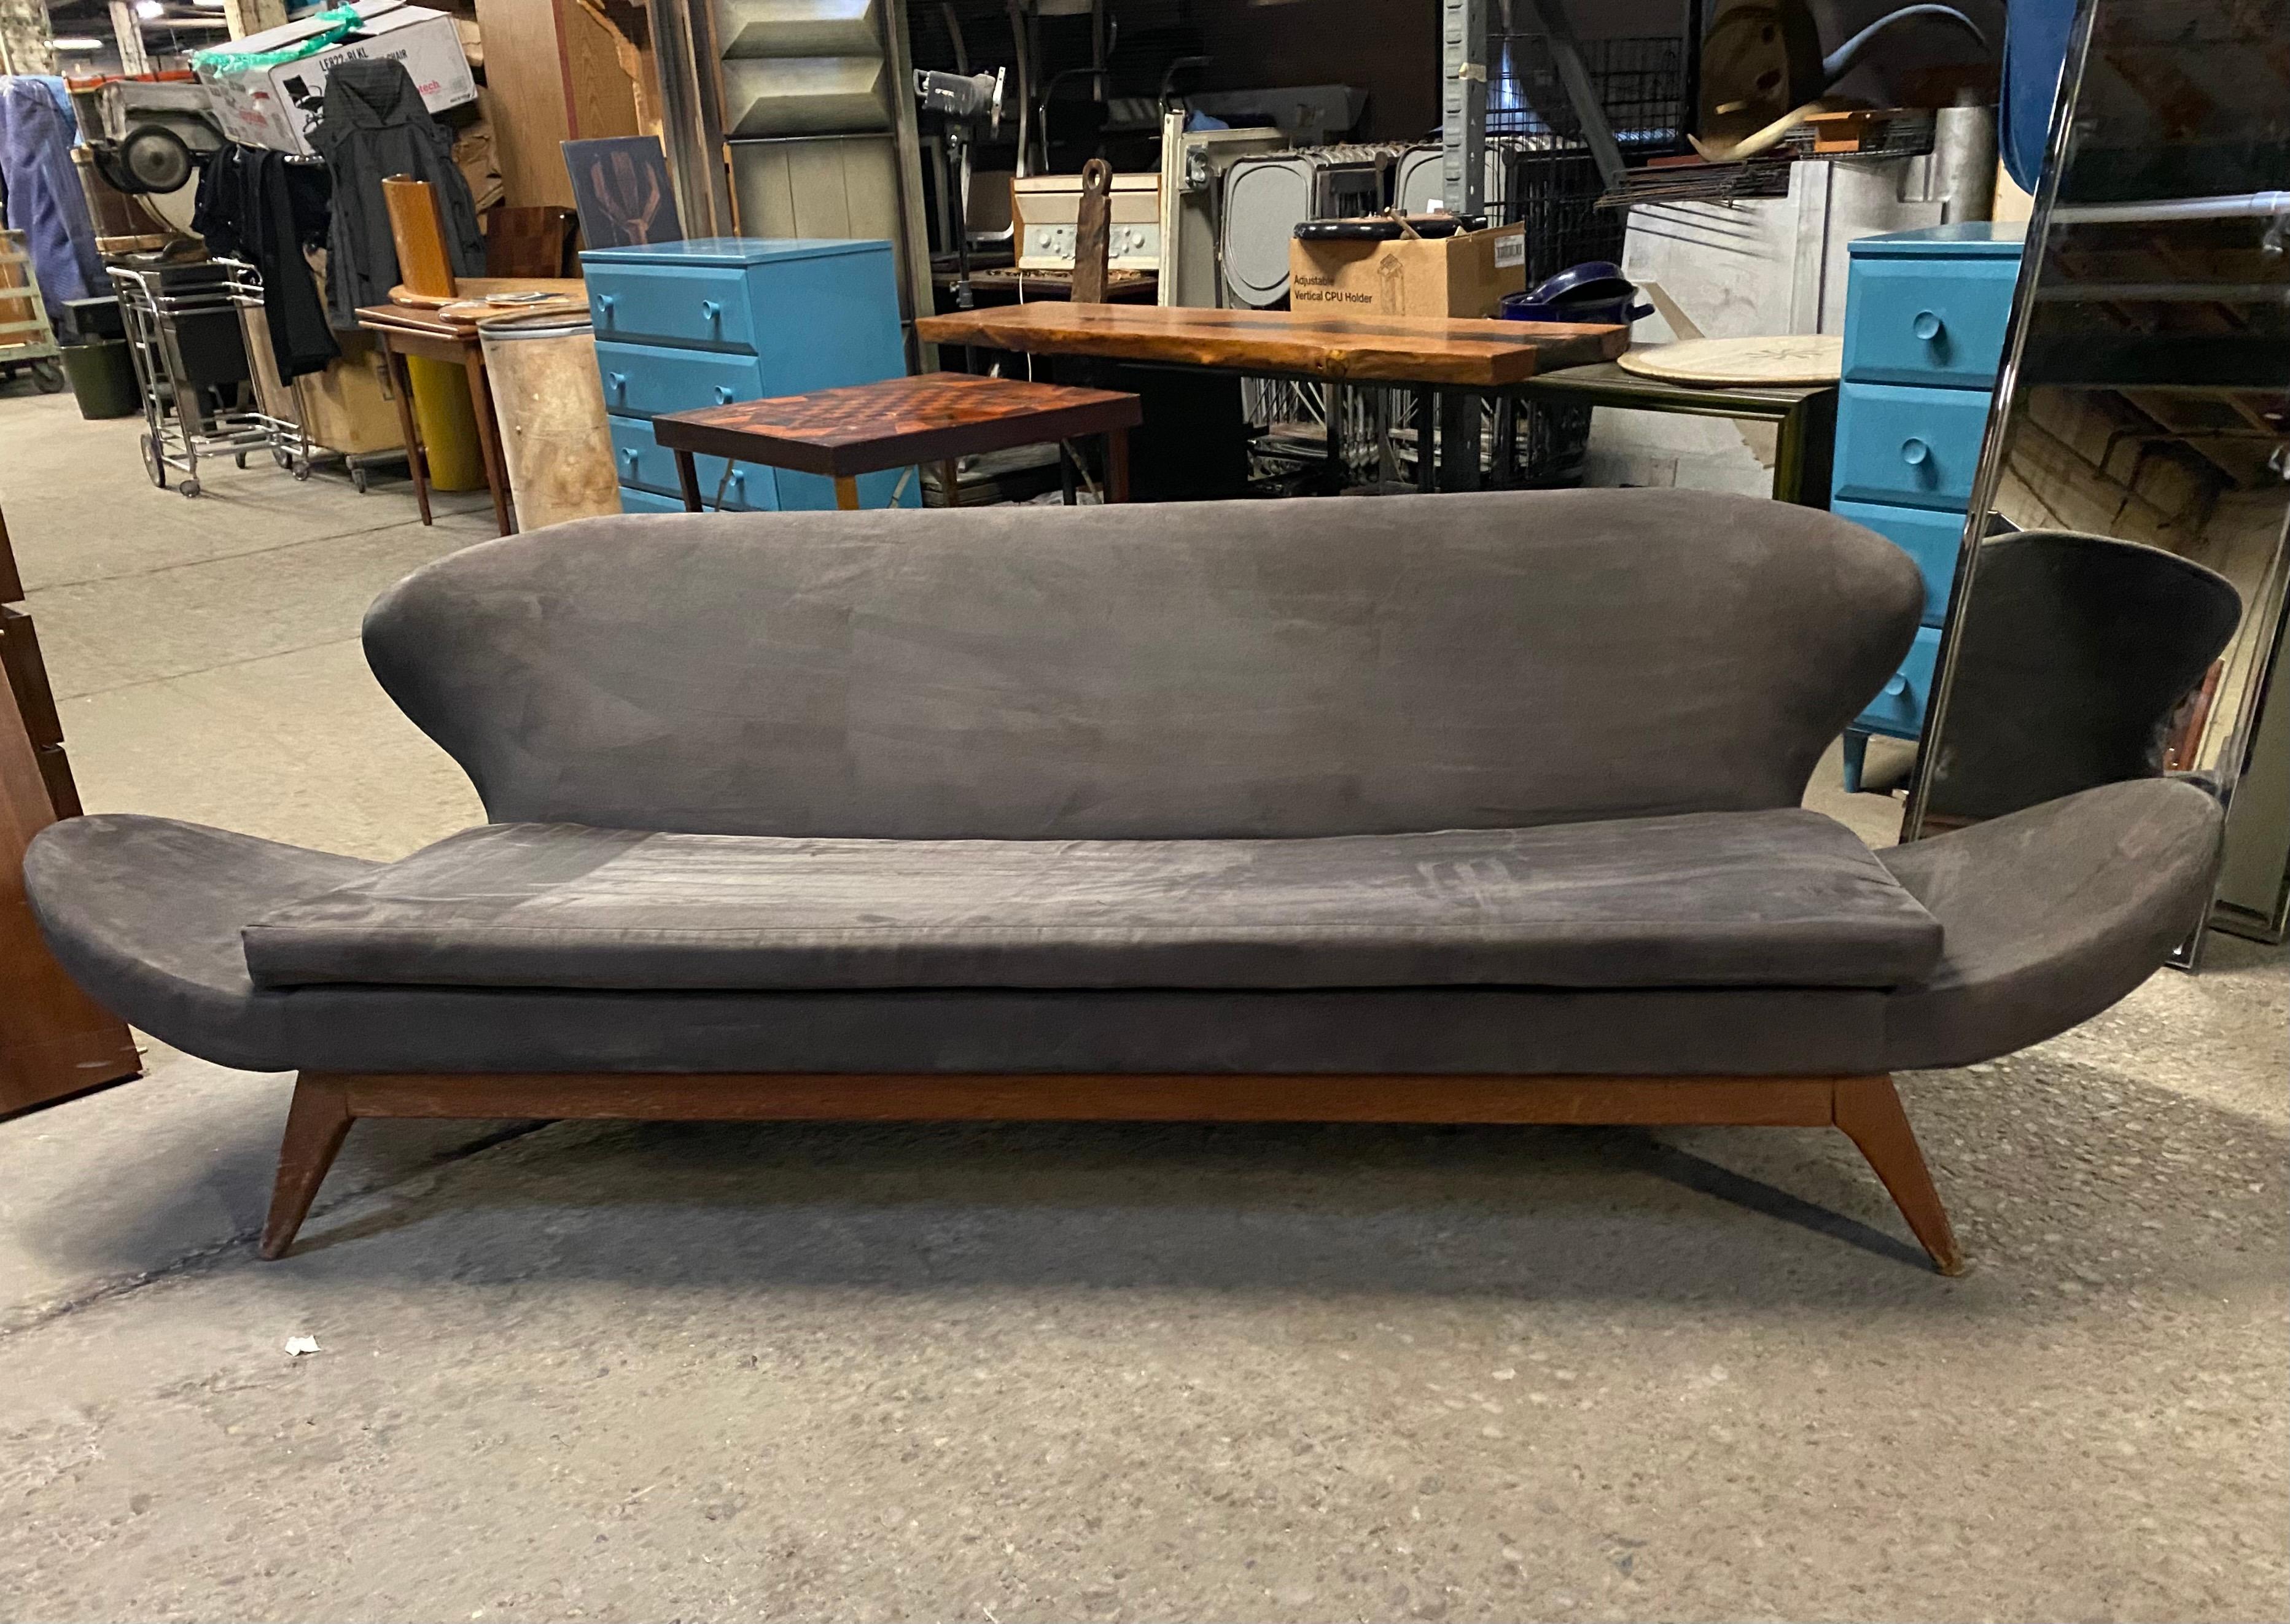 This rare Classic Mid-Century Modern sofa was designed by Luigi Tiengo and produced by the Canadian manufacturer Cimon in 1963. The sculptural shape of the elongated arms, the winged back and the slightly inclined position of the seat give the sofa